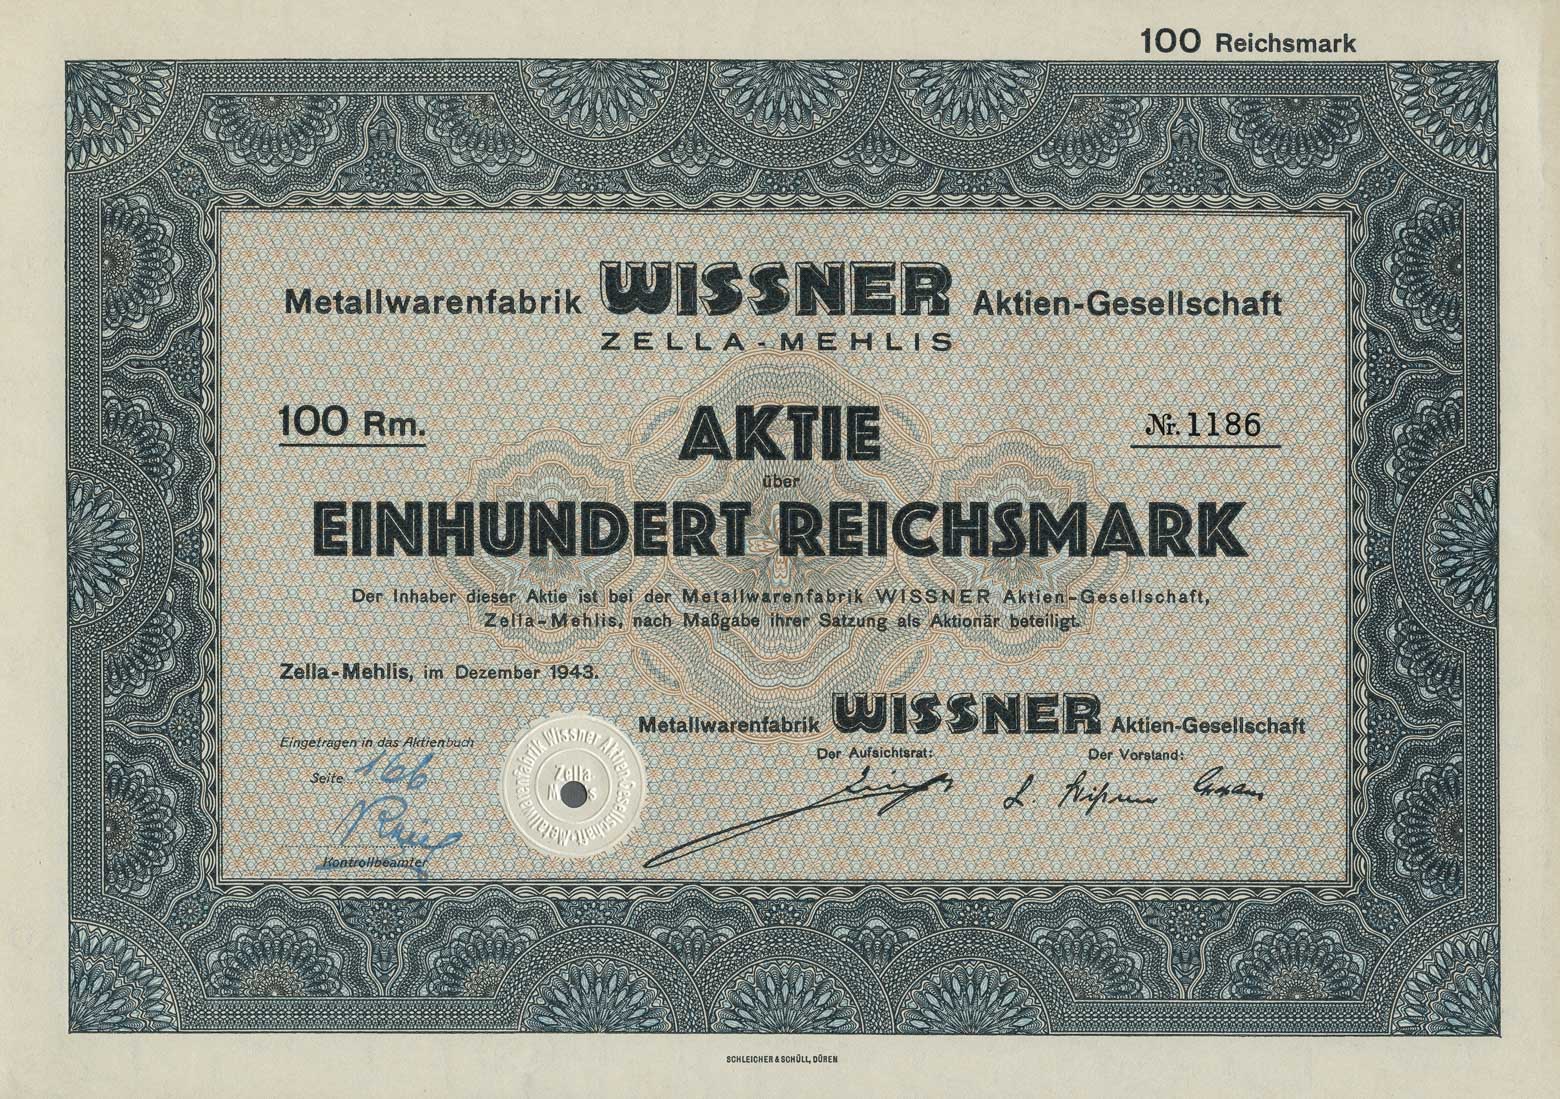 Wissner - share certificate main image